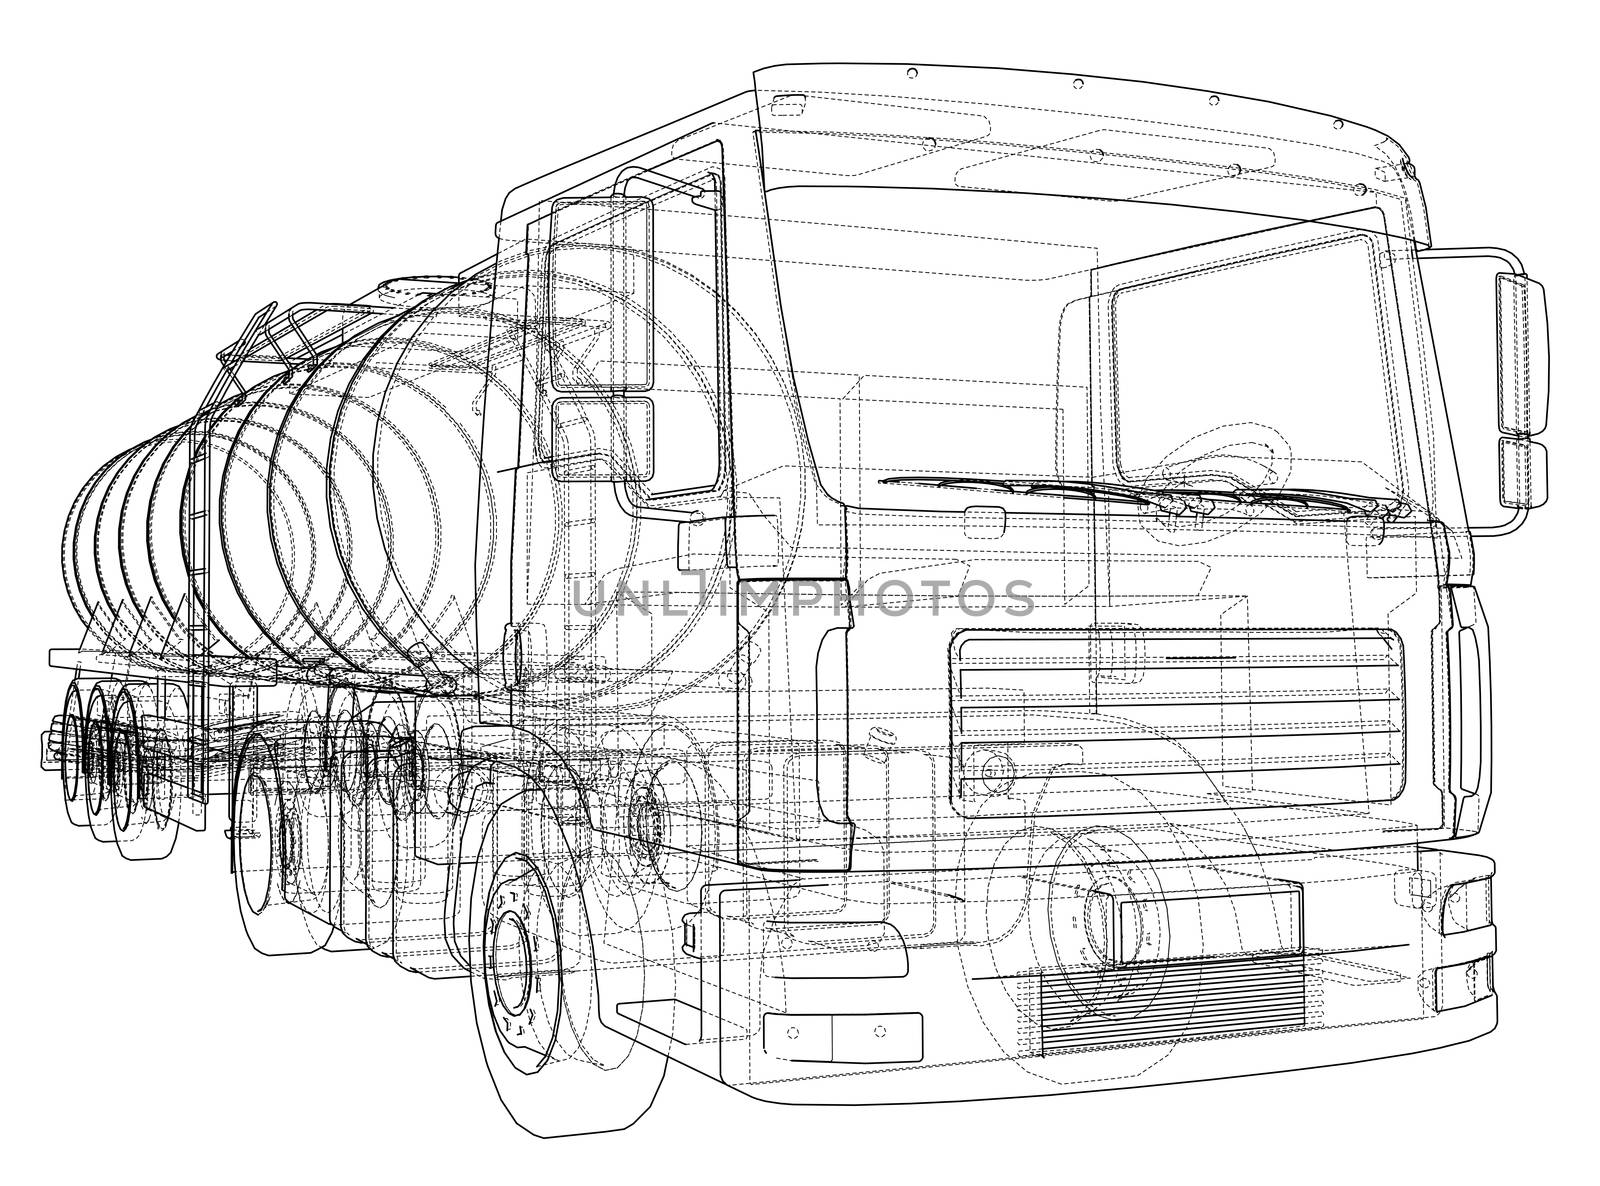 Truck with tank concept by cherezoff